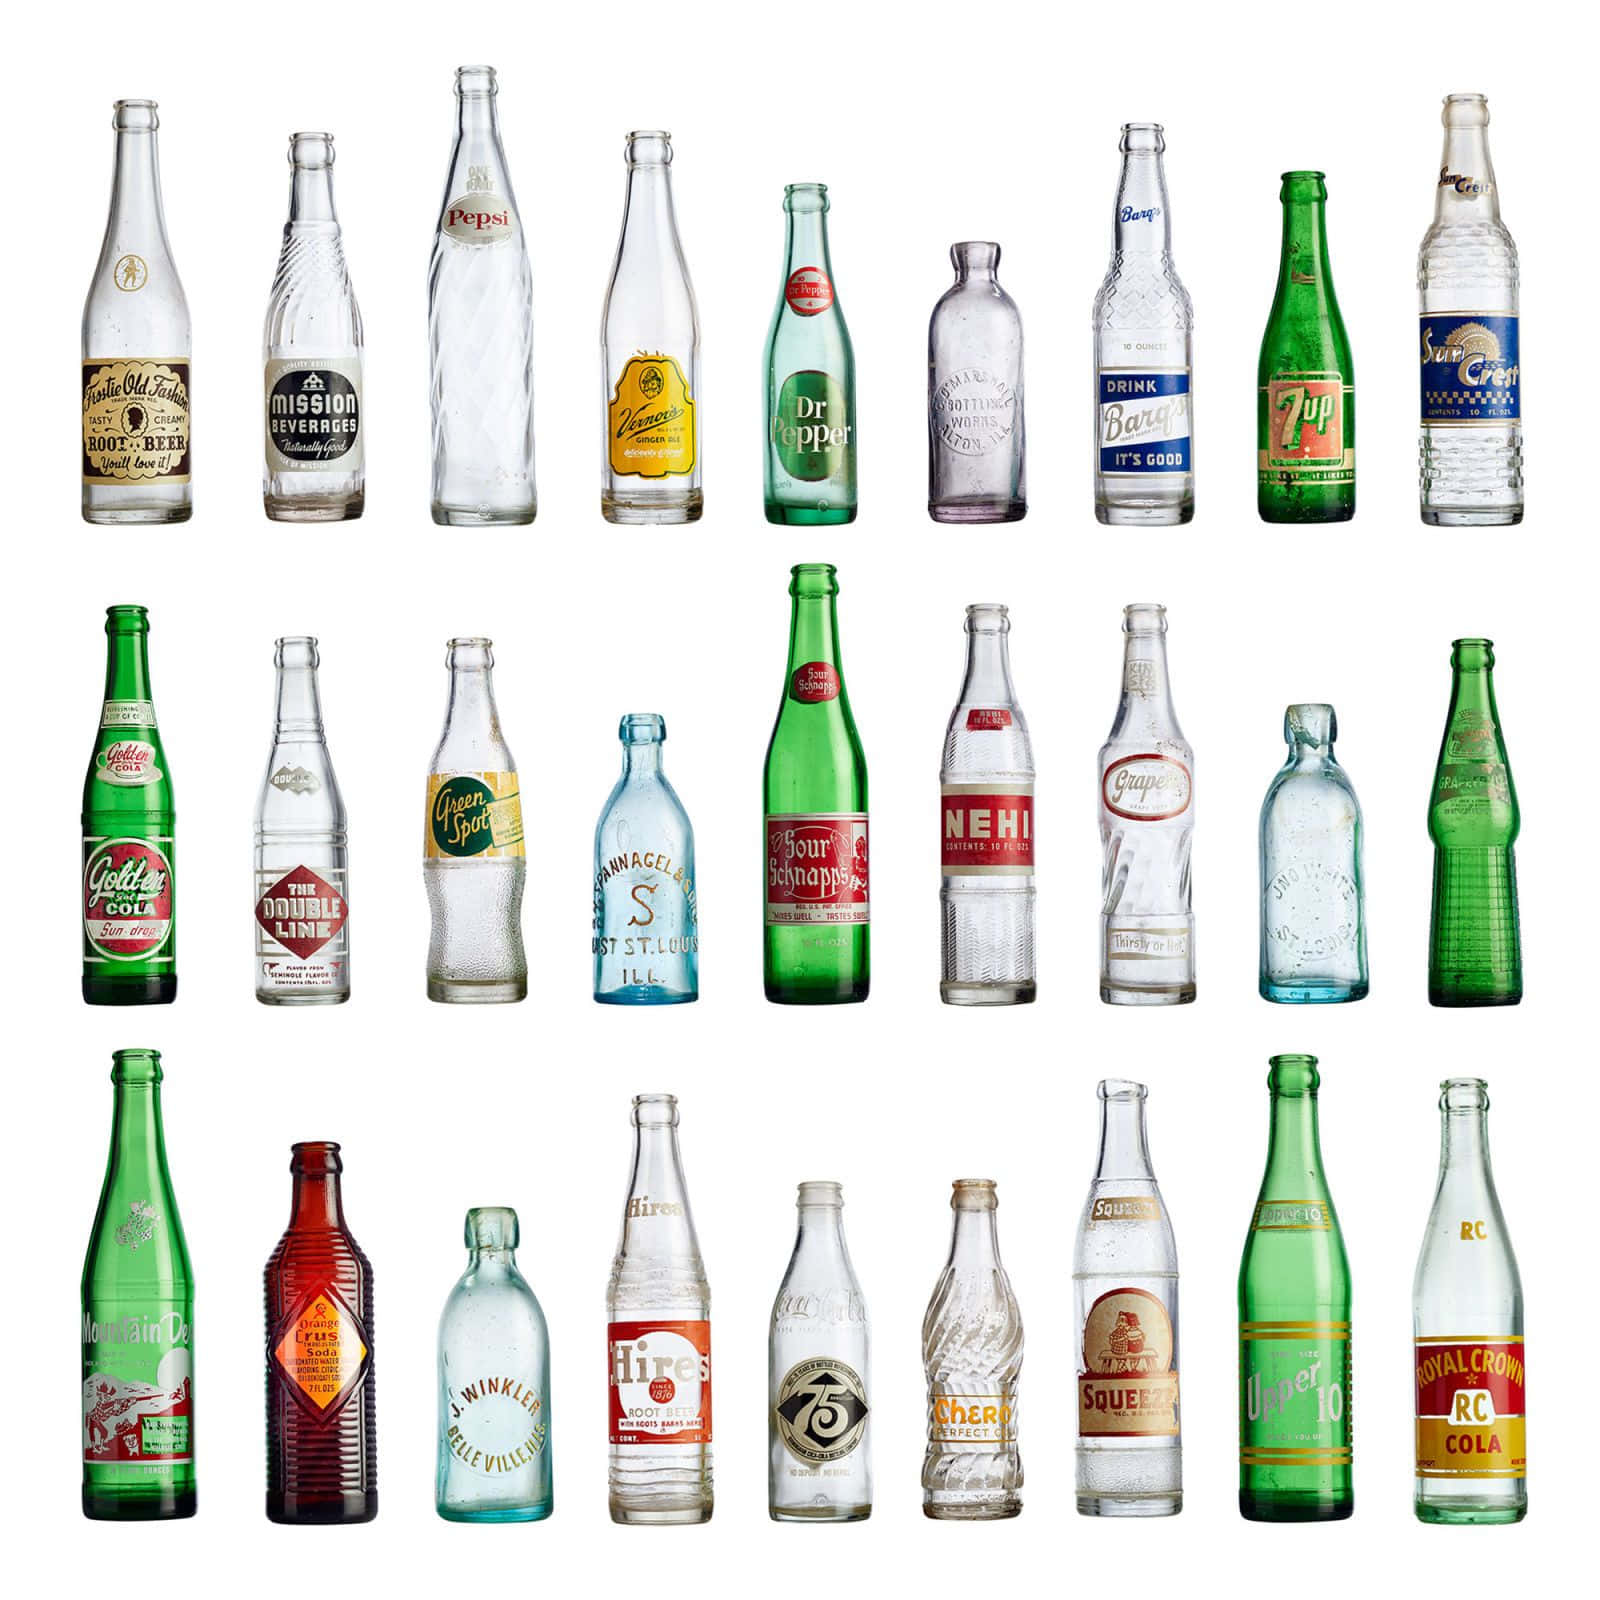 "A Collection of Vintage Bottles"